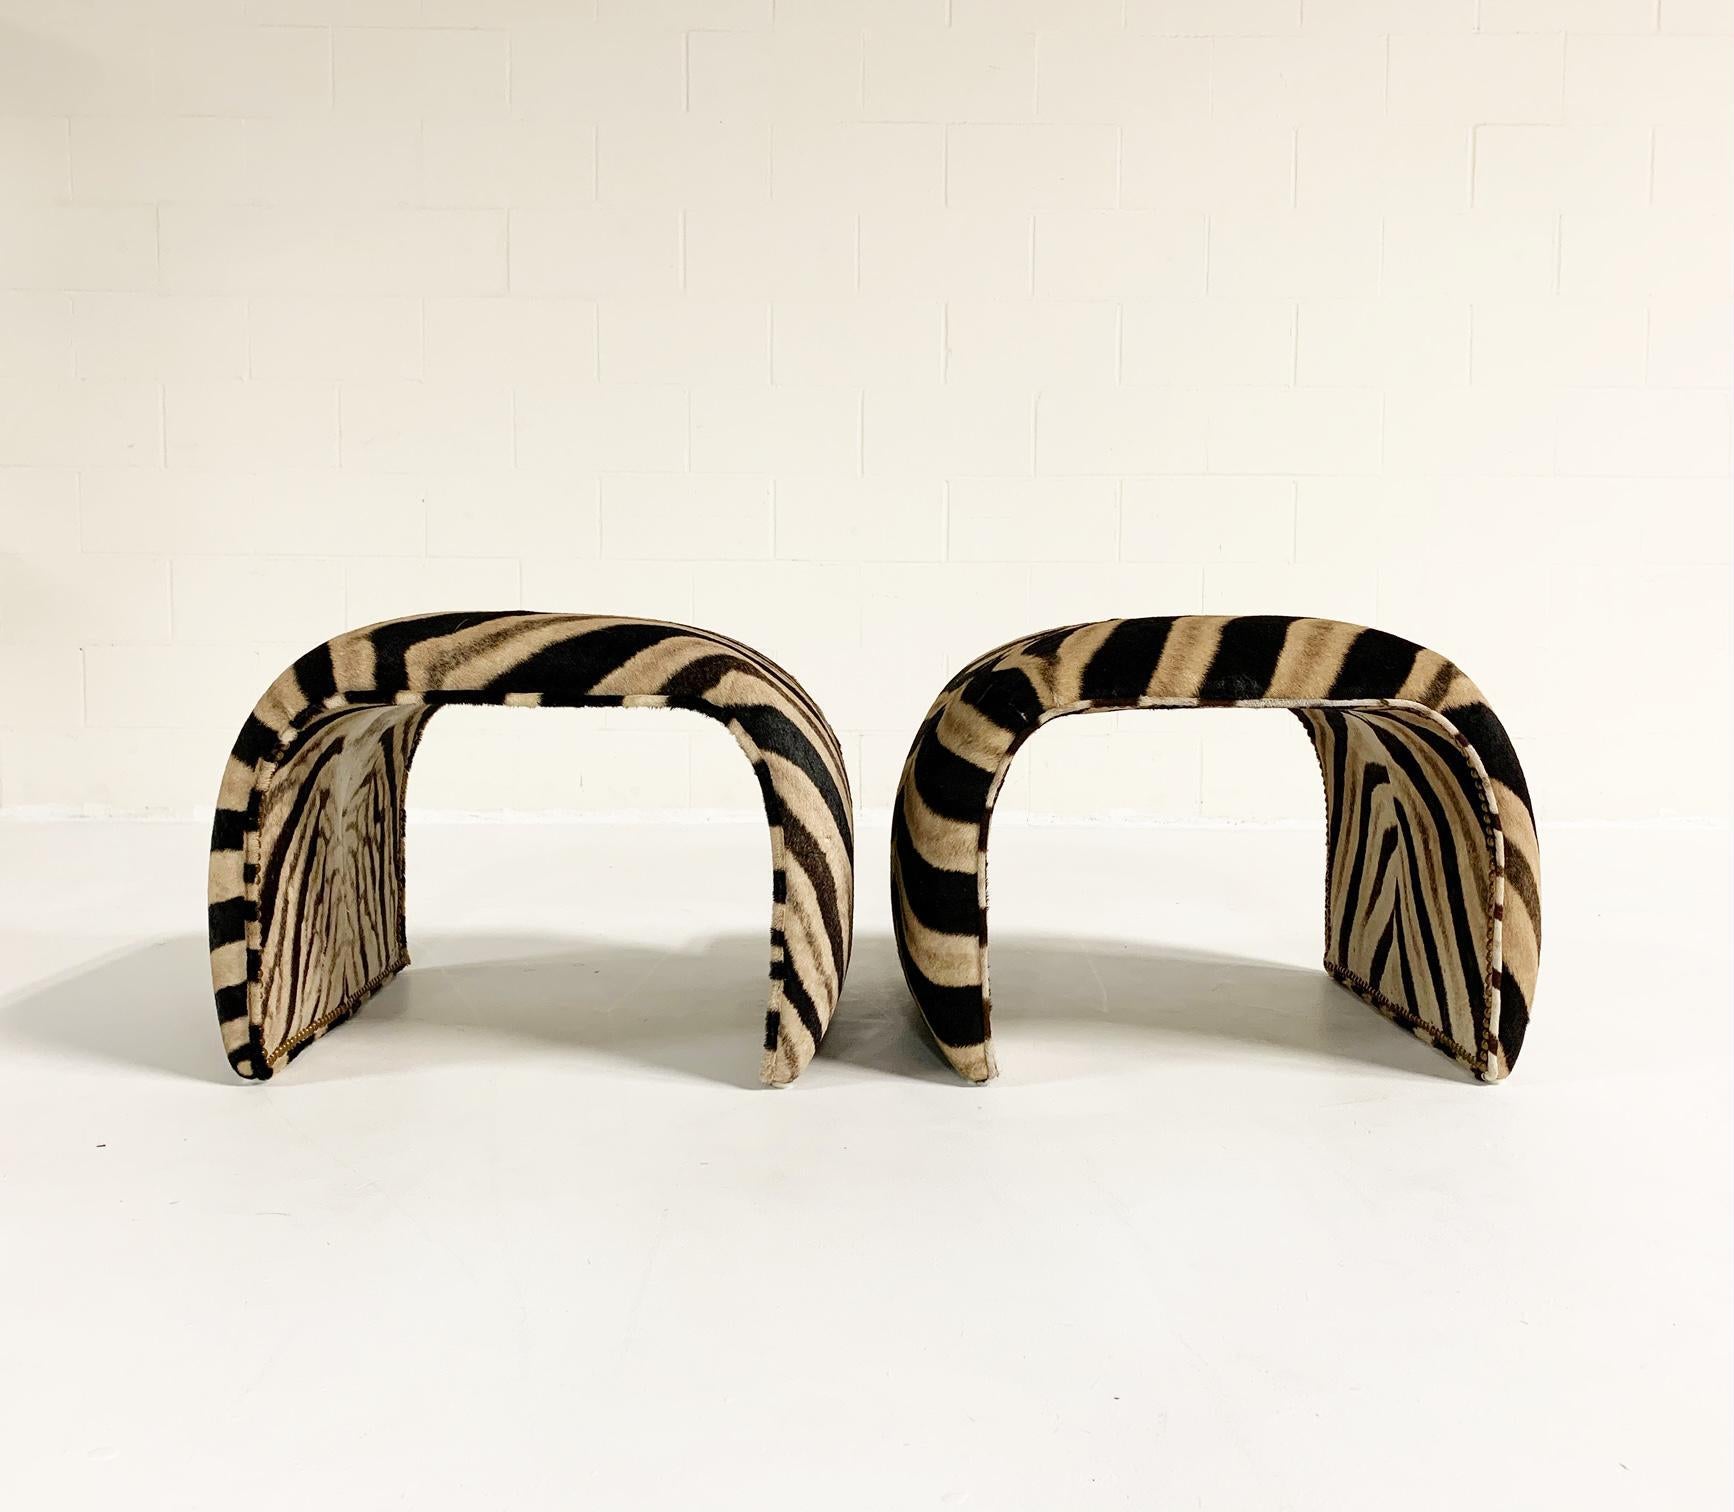 Private listing for Marybeth. 

We collected and will restore and reupholster a pair of vintage waterfall ottomans in zebra hide. Images on this listings are another pair of vintage waterfall benches. Customer has chosen the vintage ottomans that we